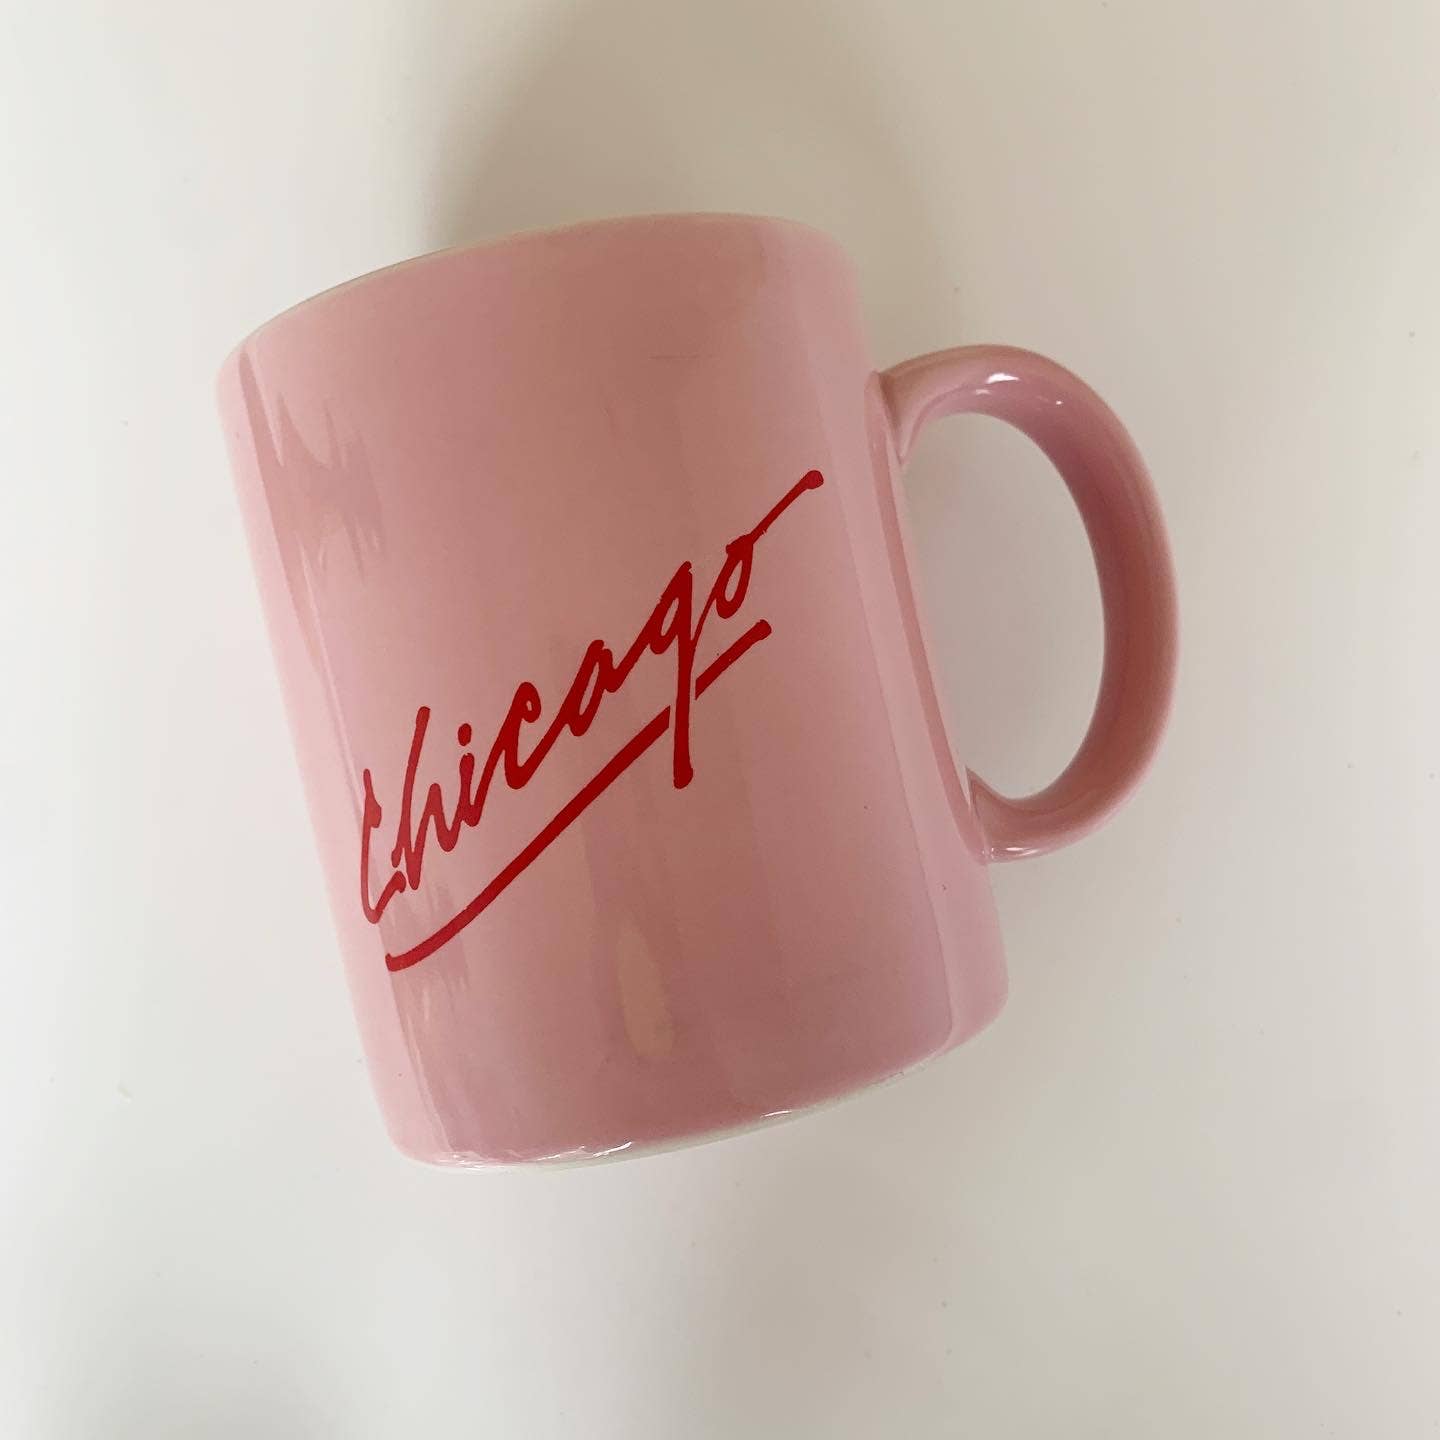 Vintage Pink and Red Chicago Coffee Mug